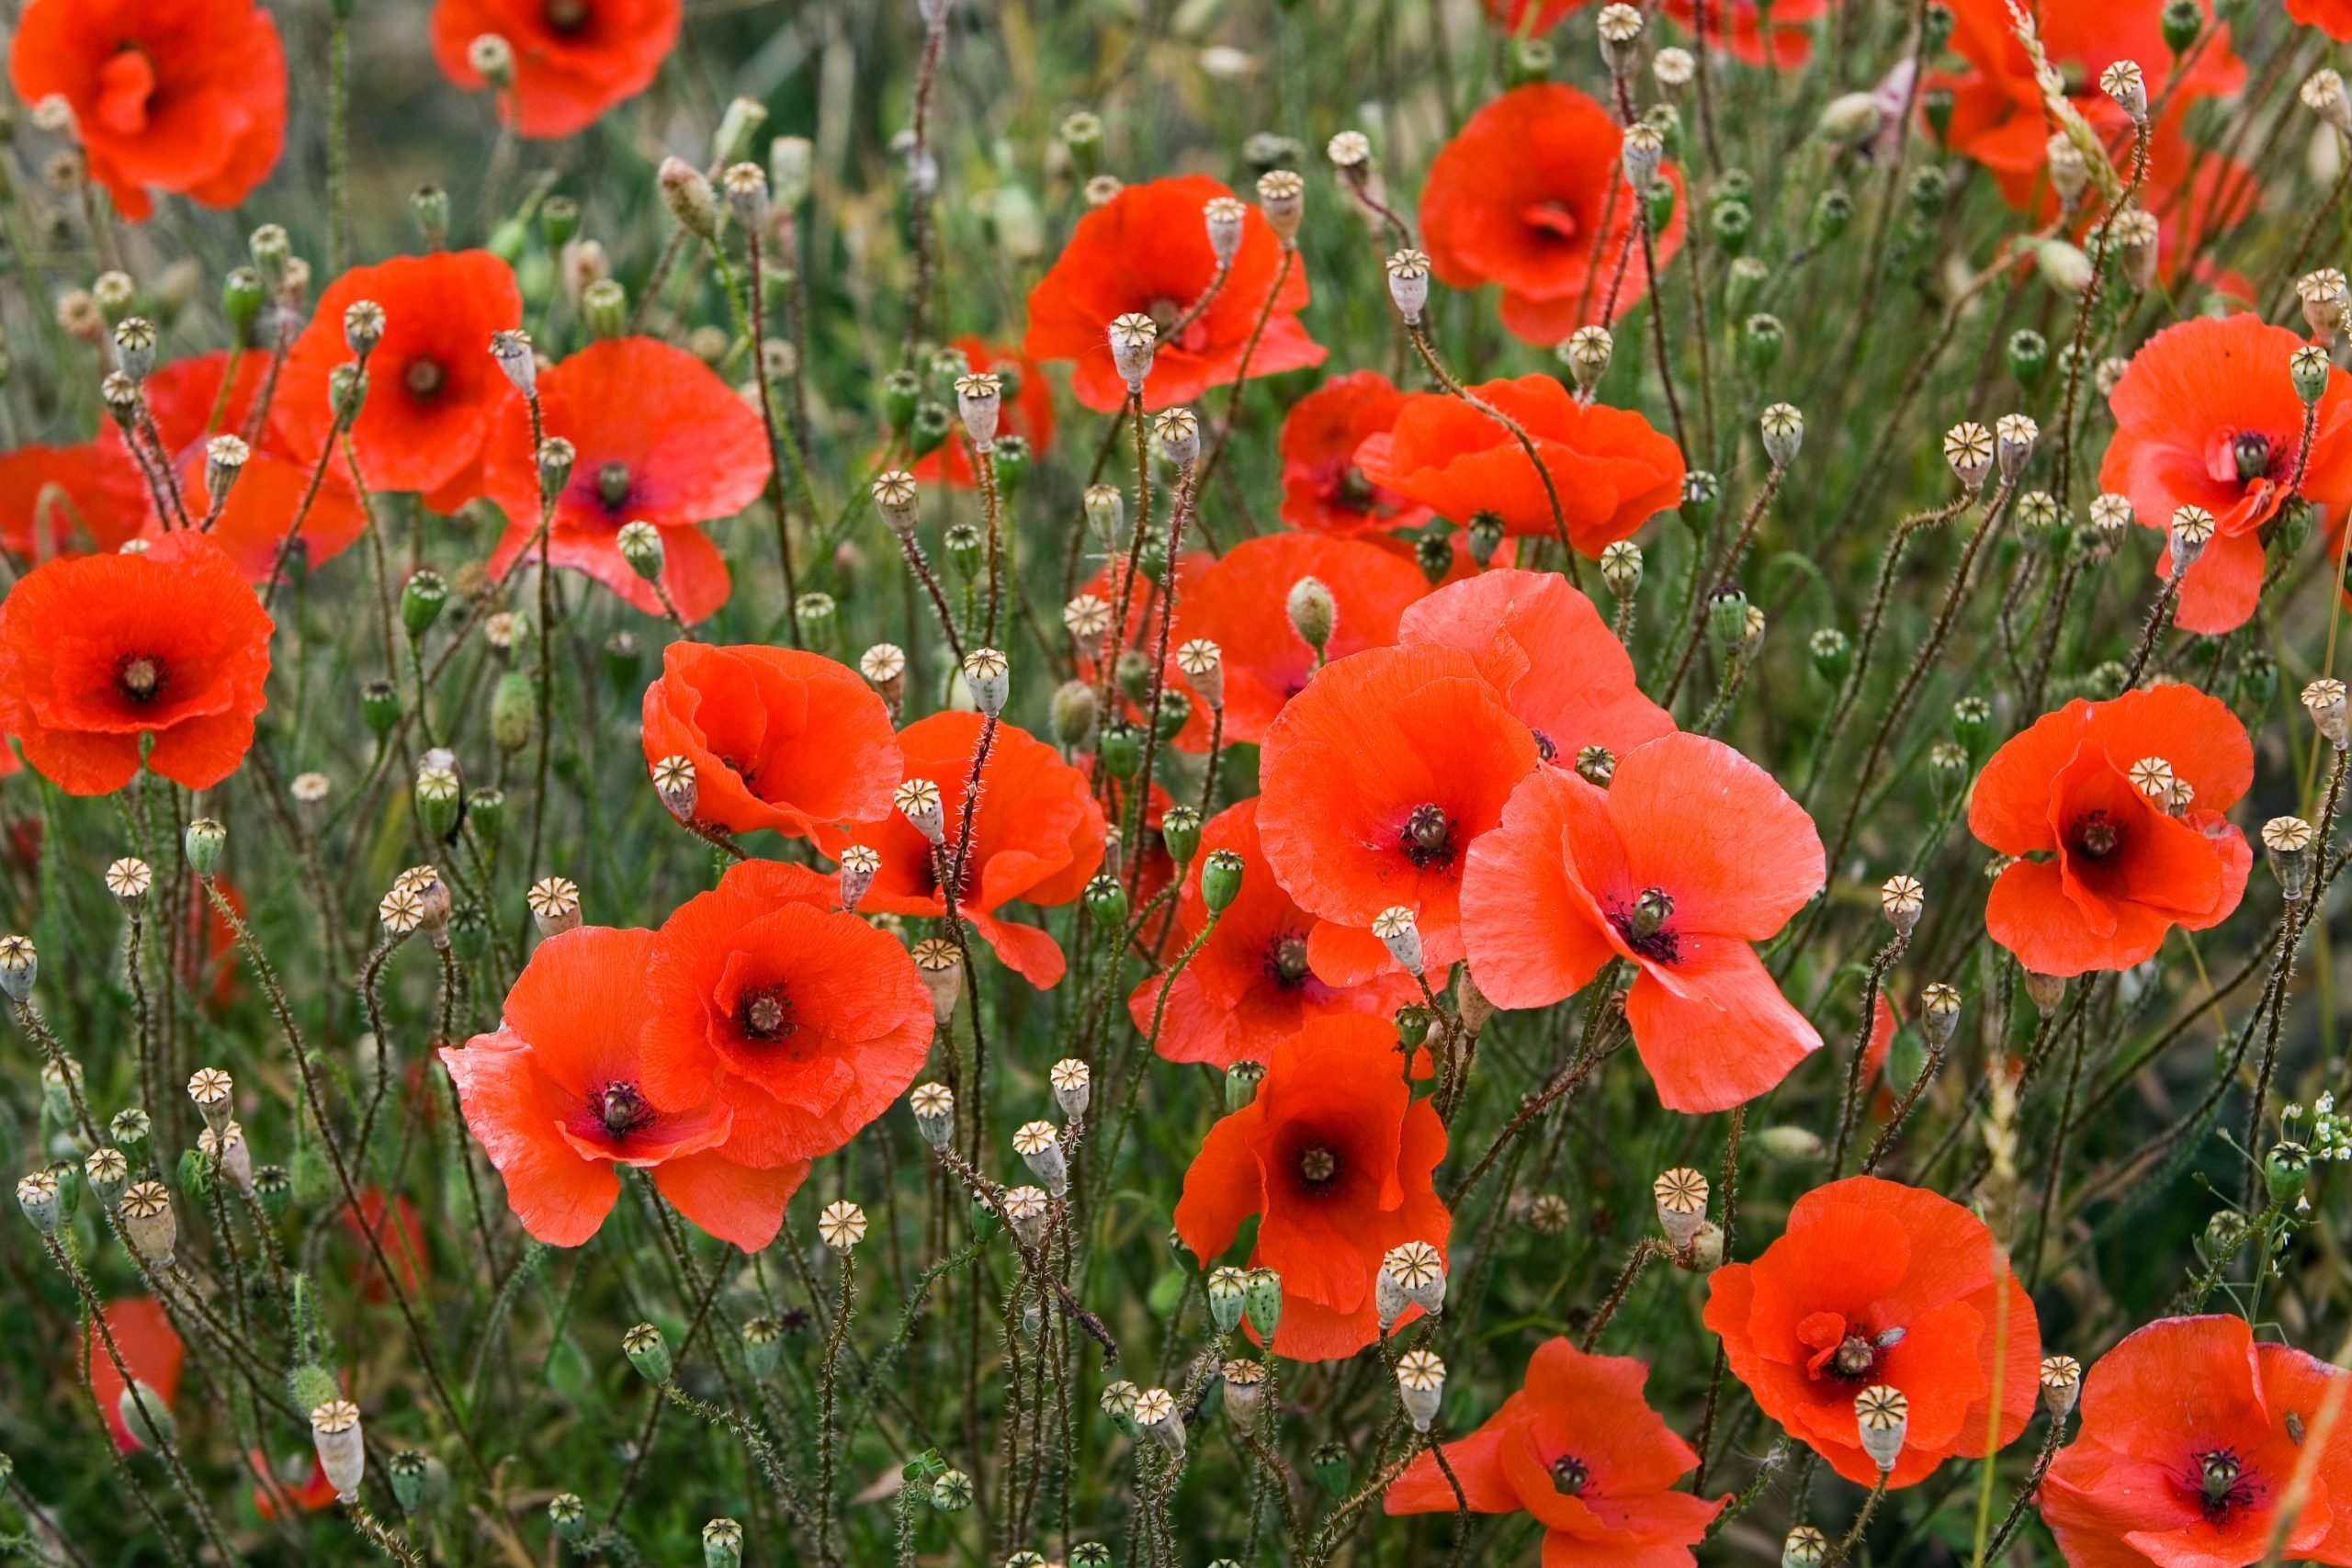 Memorial Poppies: The Significance Behind the Red